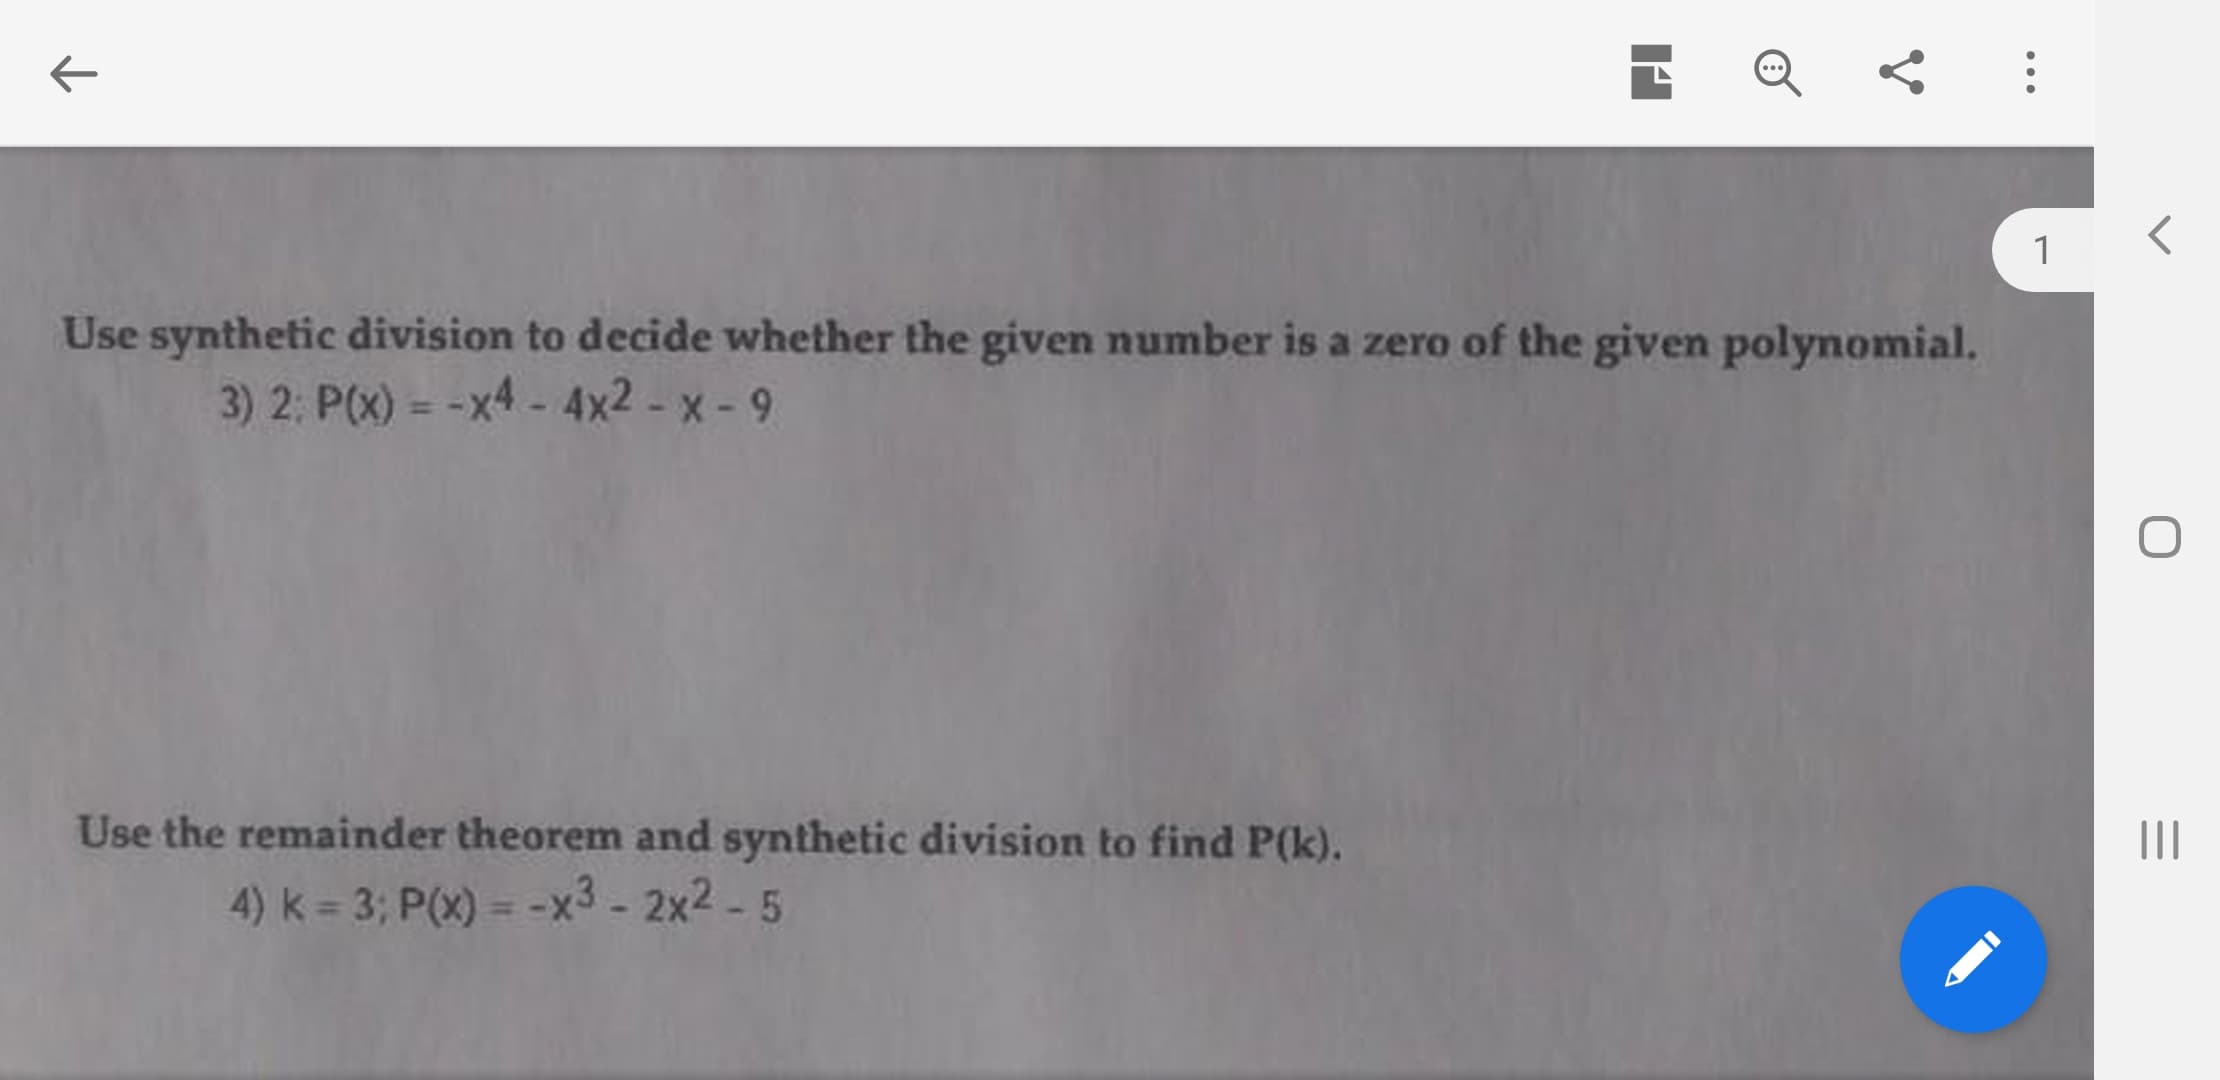 Use synthetic division to decide whether the given number is a zero of the given polymomial.
3) 2: P(x) = -x4 - 4x2 - x - 9
%3D
Use the remainder theorem and synthetic division to find P(k).
4) k = 3; P(X) = -x3-2x2- 5
